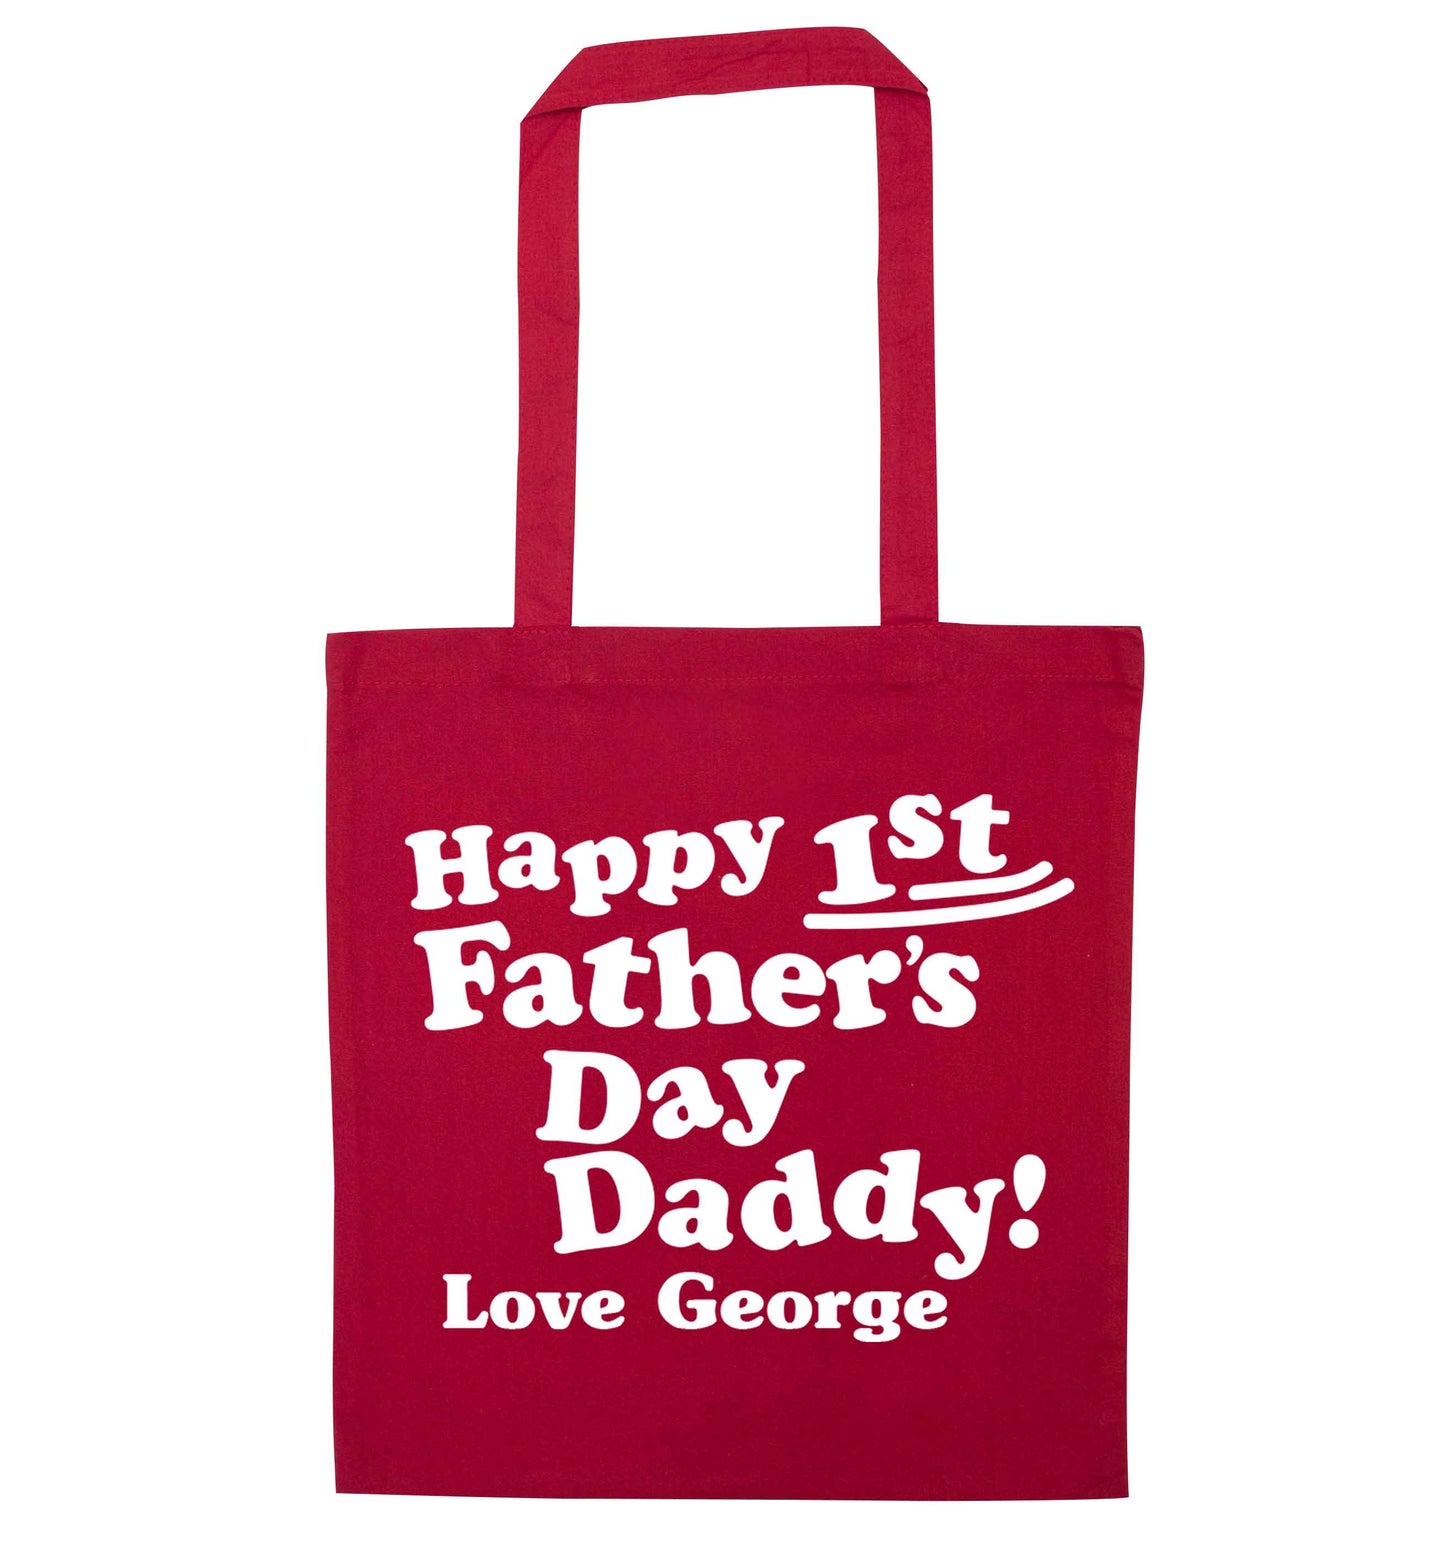 Personalised Happy first father's day daddy  red tote bag